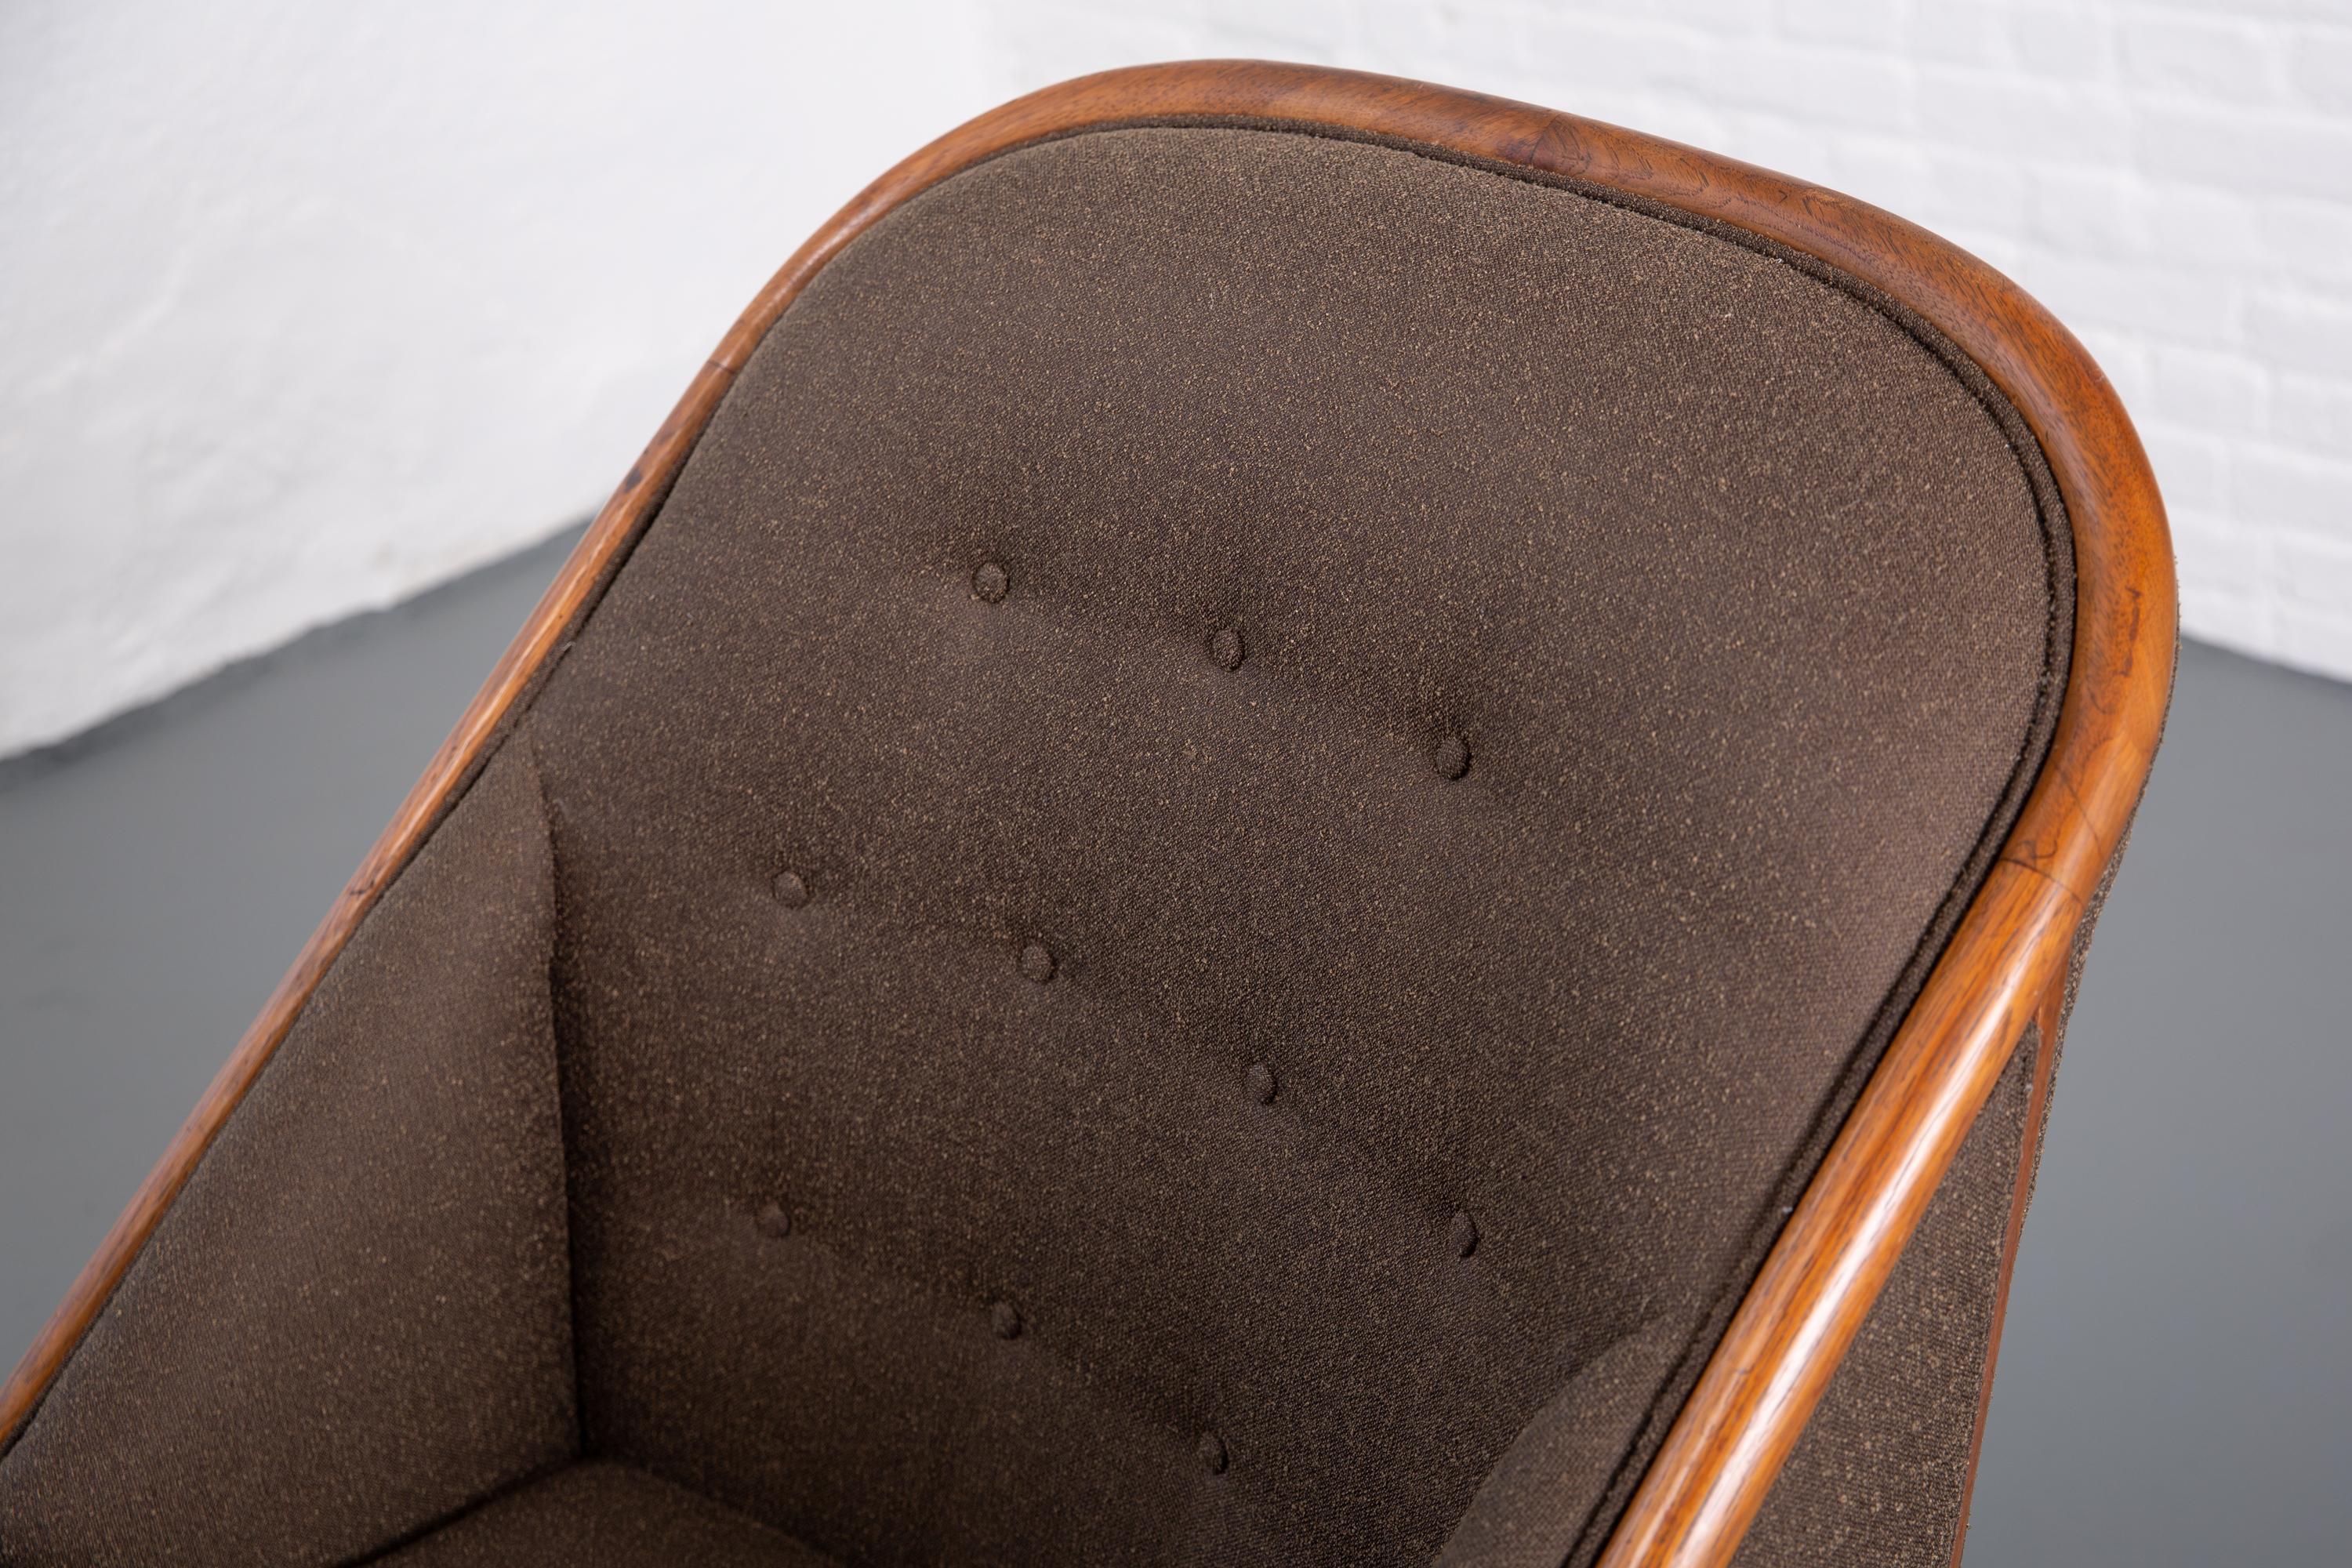 Mid-20th Century Newly Upholstered Mid-Century Modern Lounge Chair Attributed to Widdicomb